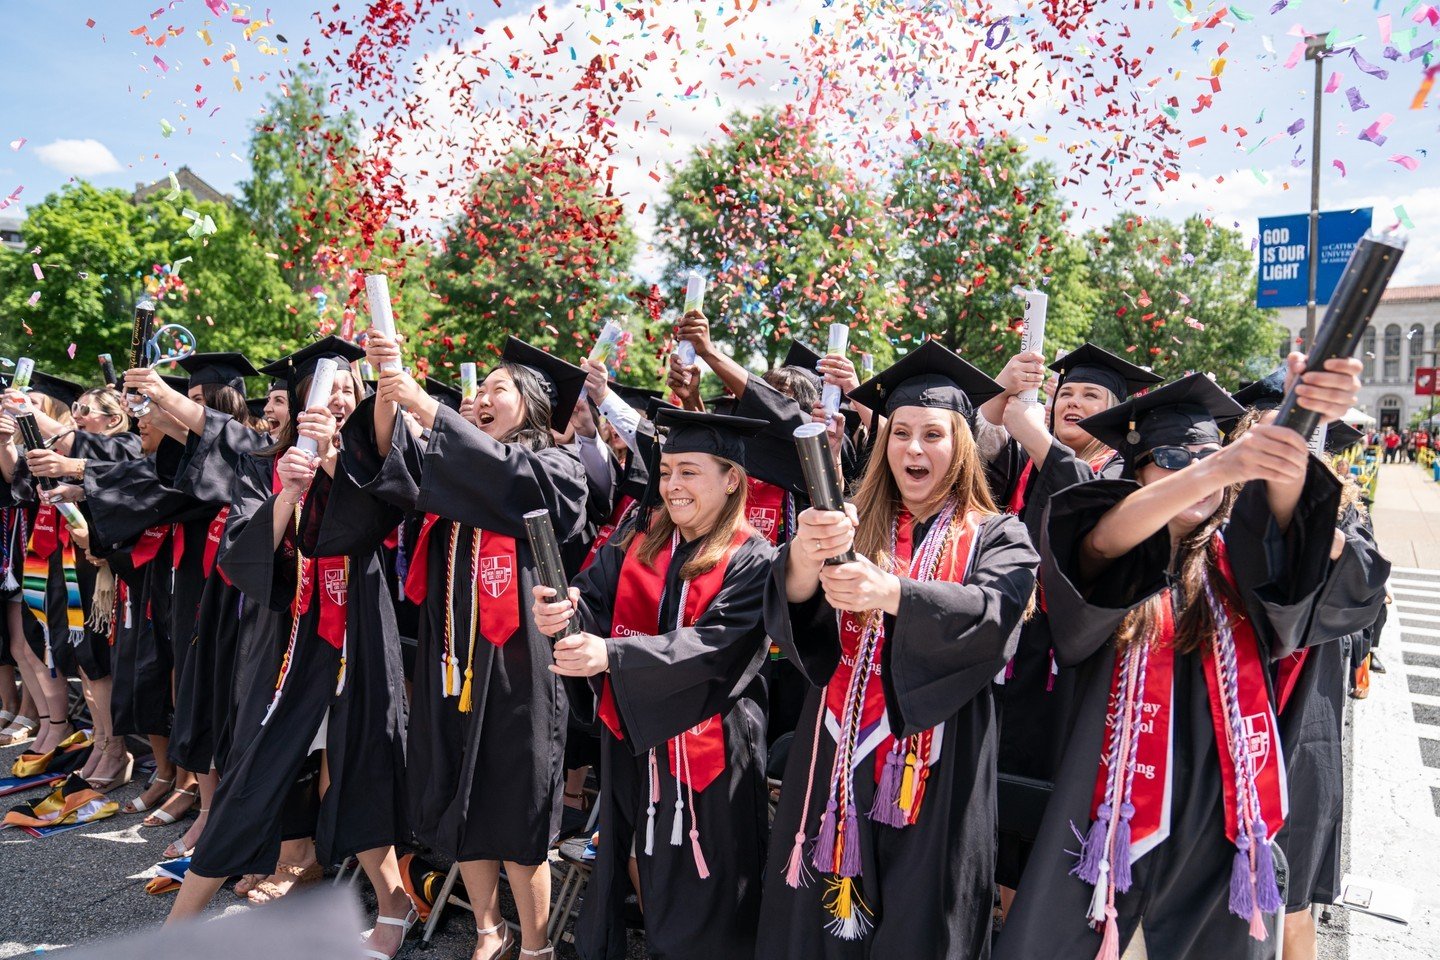 ❤️ So proud of all of our graduates today and every day. Drop a &ldquo;🎓&rdquo; in the comments below if you&rsquo;re a Catholic University alum &amp; graduated yesterday!